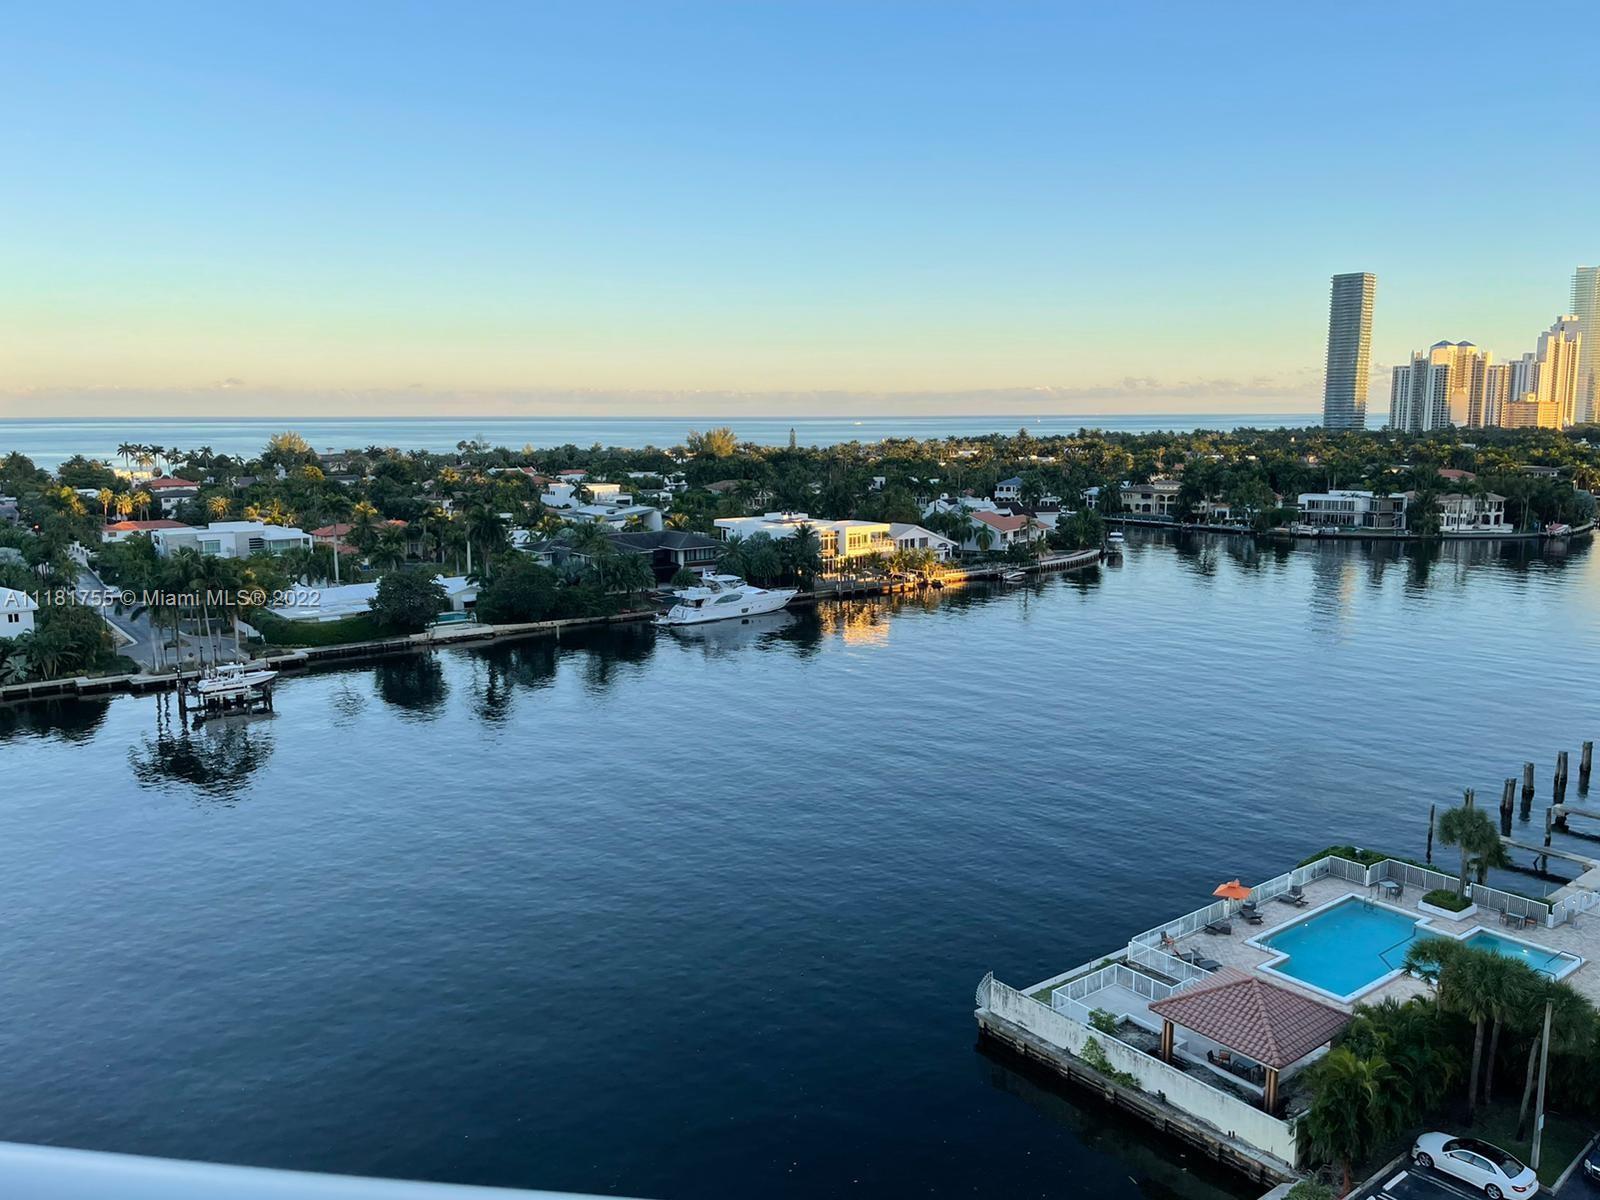 Immaculate unit! This condo has some of the nicest views in Aventura, overlooking the intercoastal, 